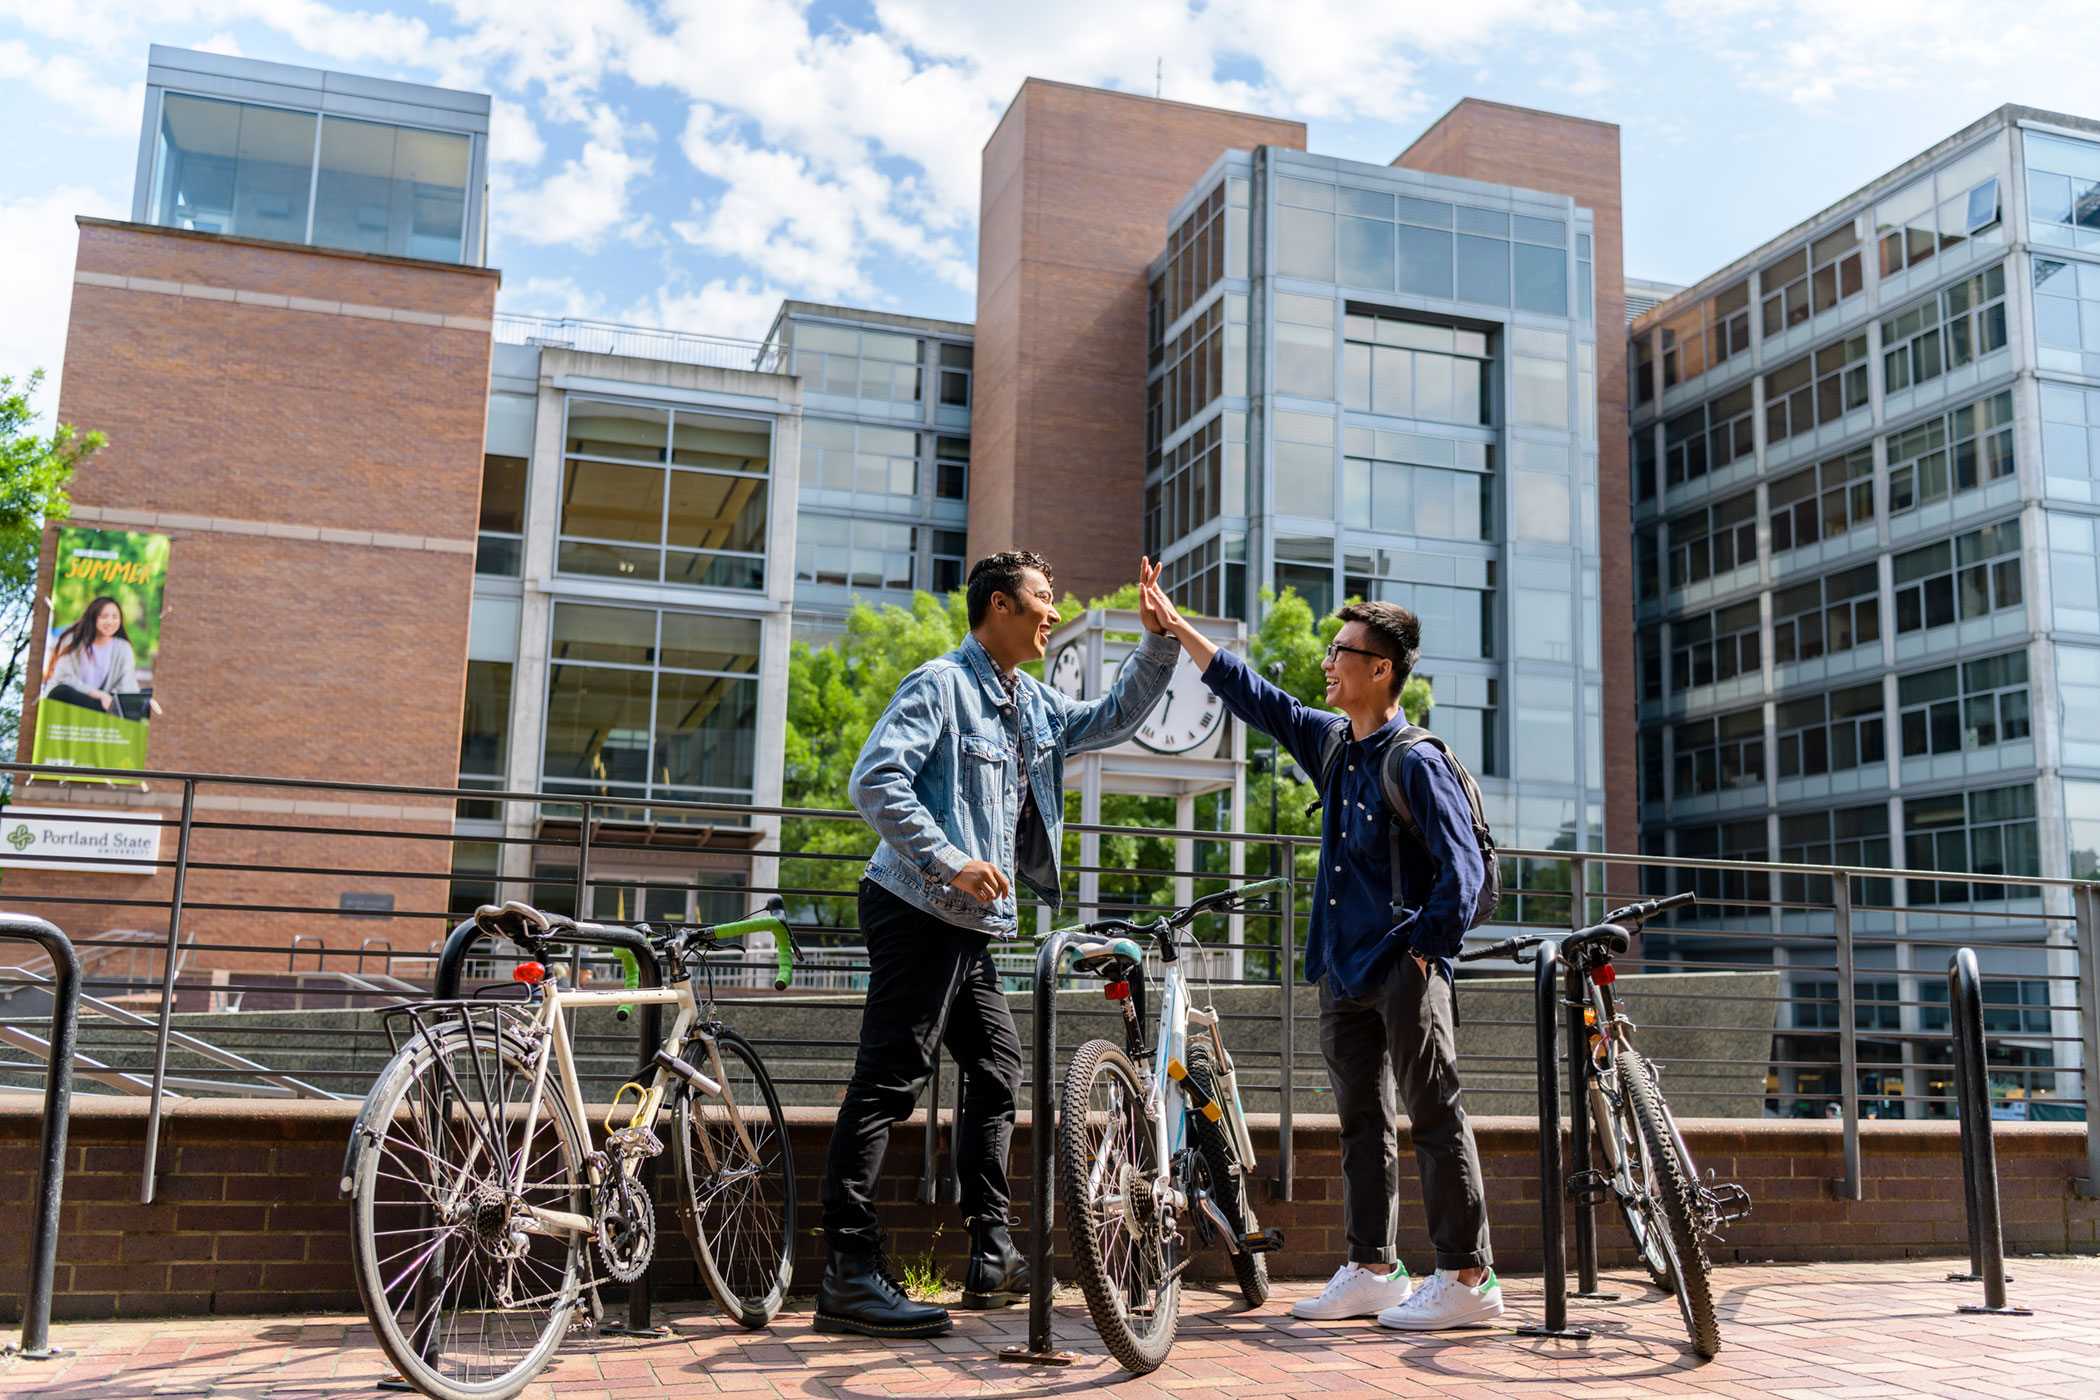 Students connecting on campus